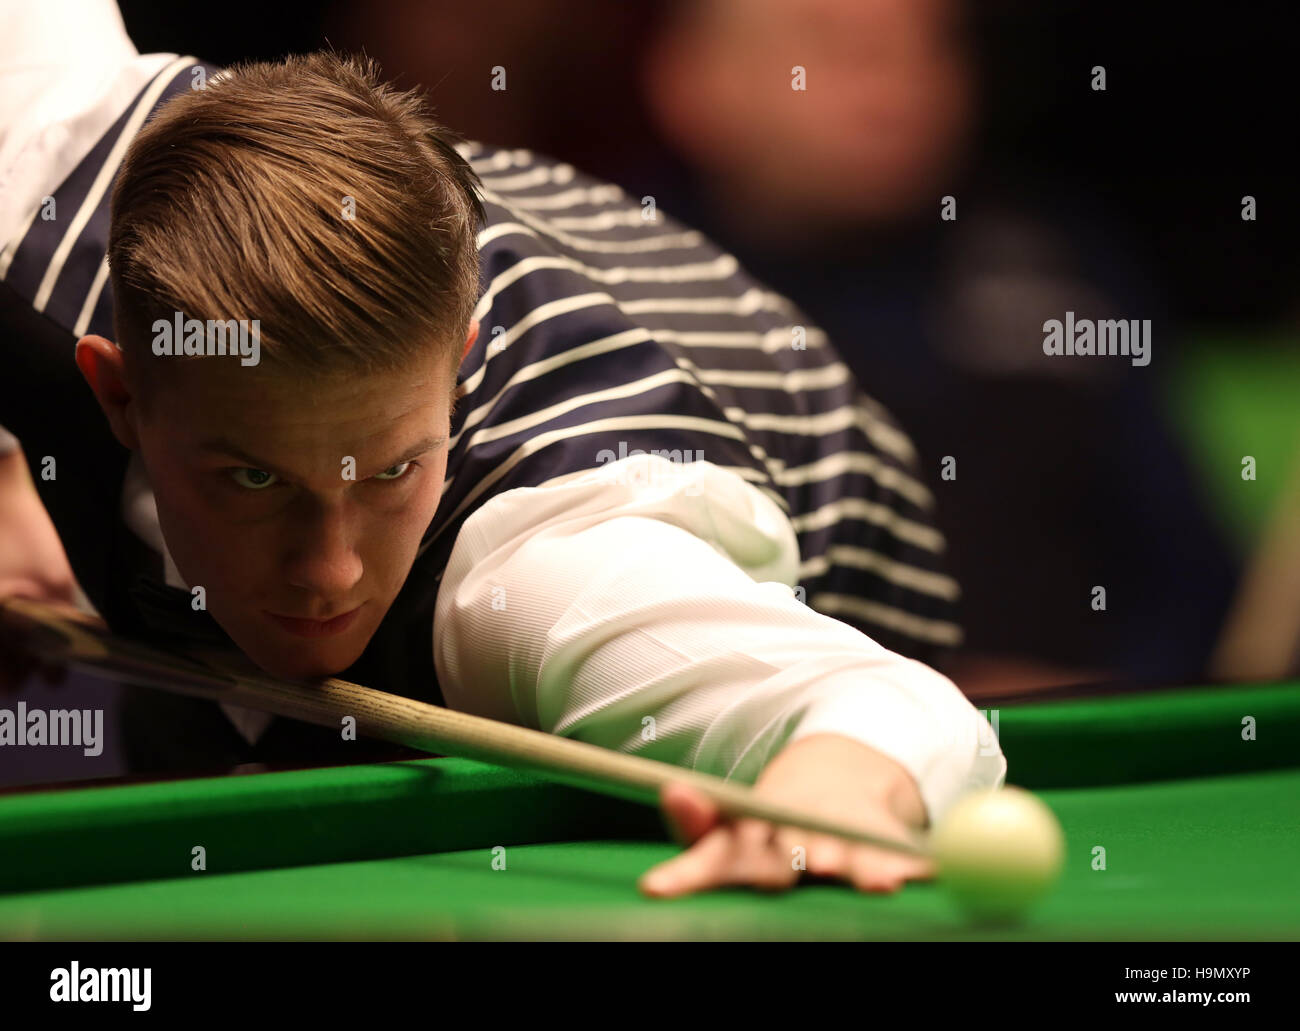 Adam Stefanow in action during his first round match against Stuart Bingham during day three of the Betway UK Championships 2016, at the York Barbican. PRESS ASSOCIATION Photo. Picture date: Thursday November 24, 2016. See PA story SNOOKER York. Photo credit should read: Simon Cooper/PA Wire Stock Photo